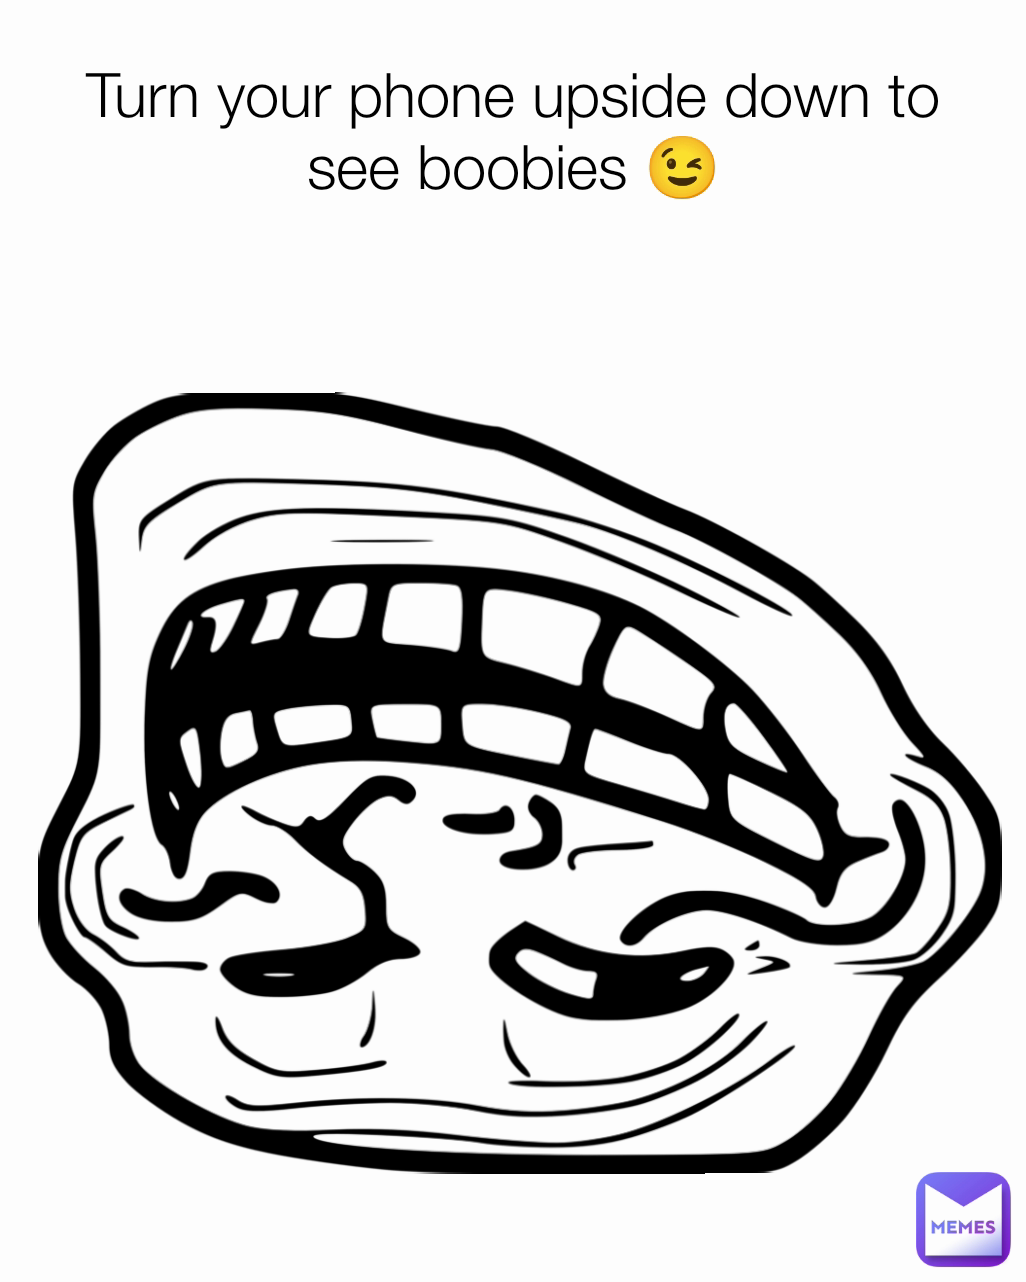 Turn your phone upside down to see boobies 😉